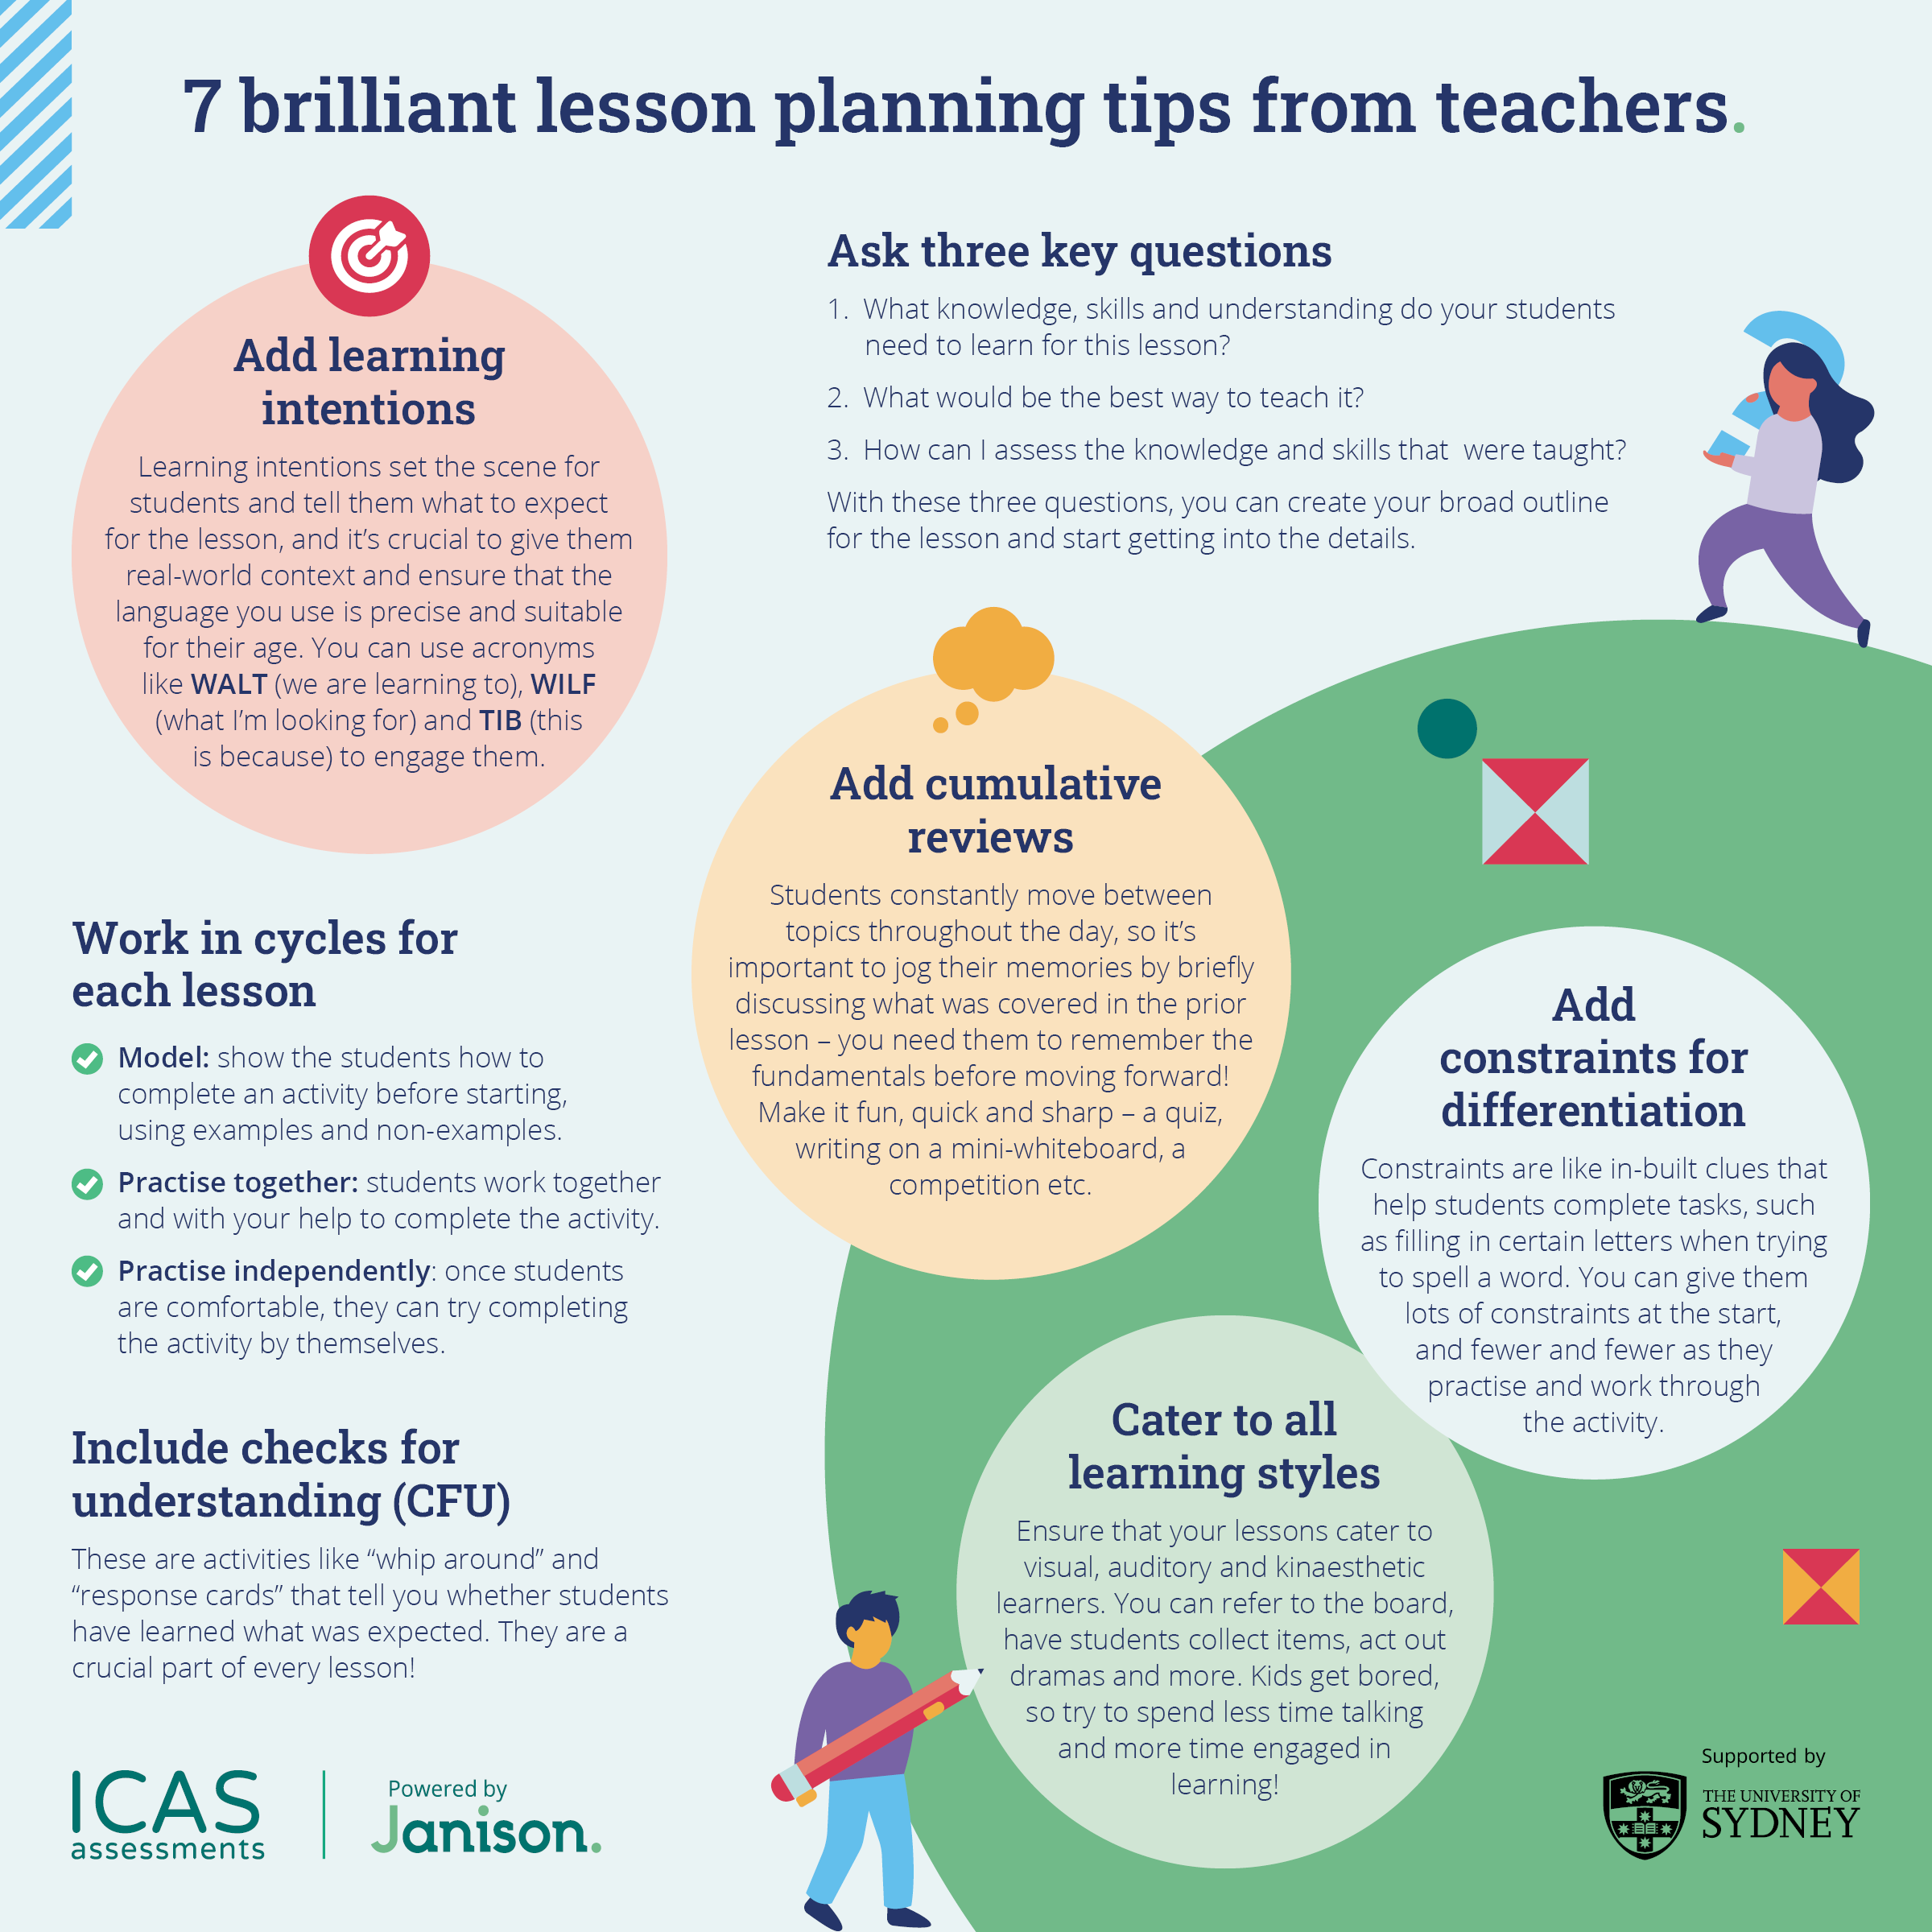 lesson planning tips from teachers infographic ICAS